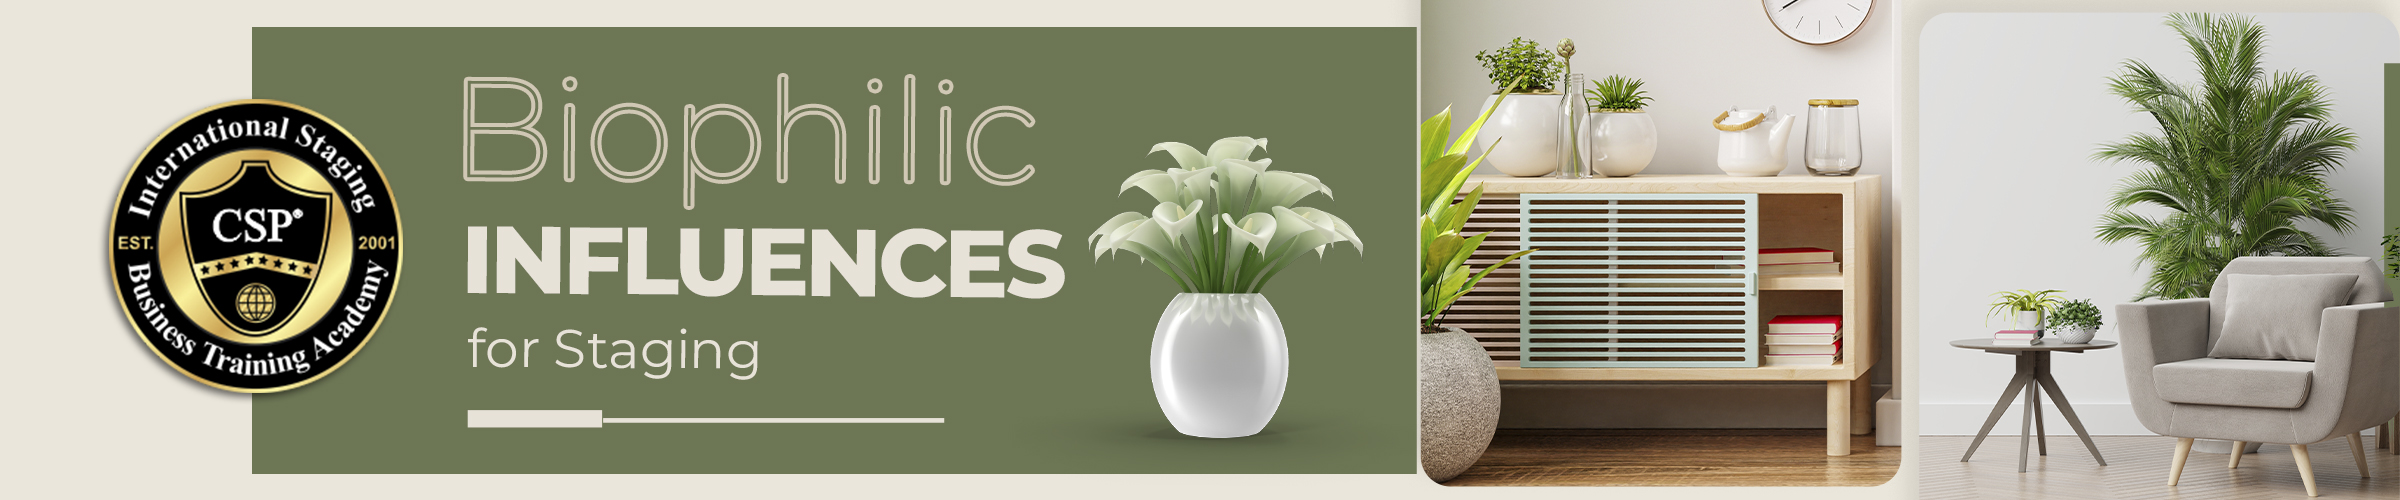 biophilic influences for staging